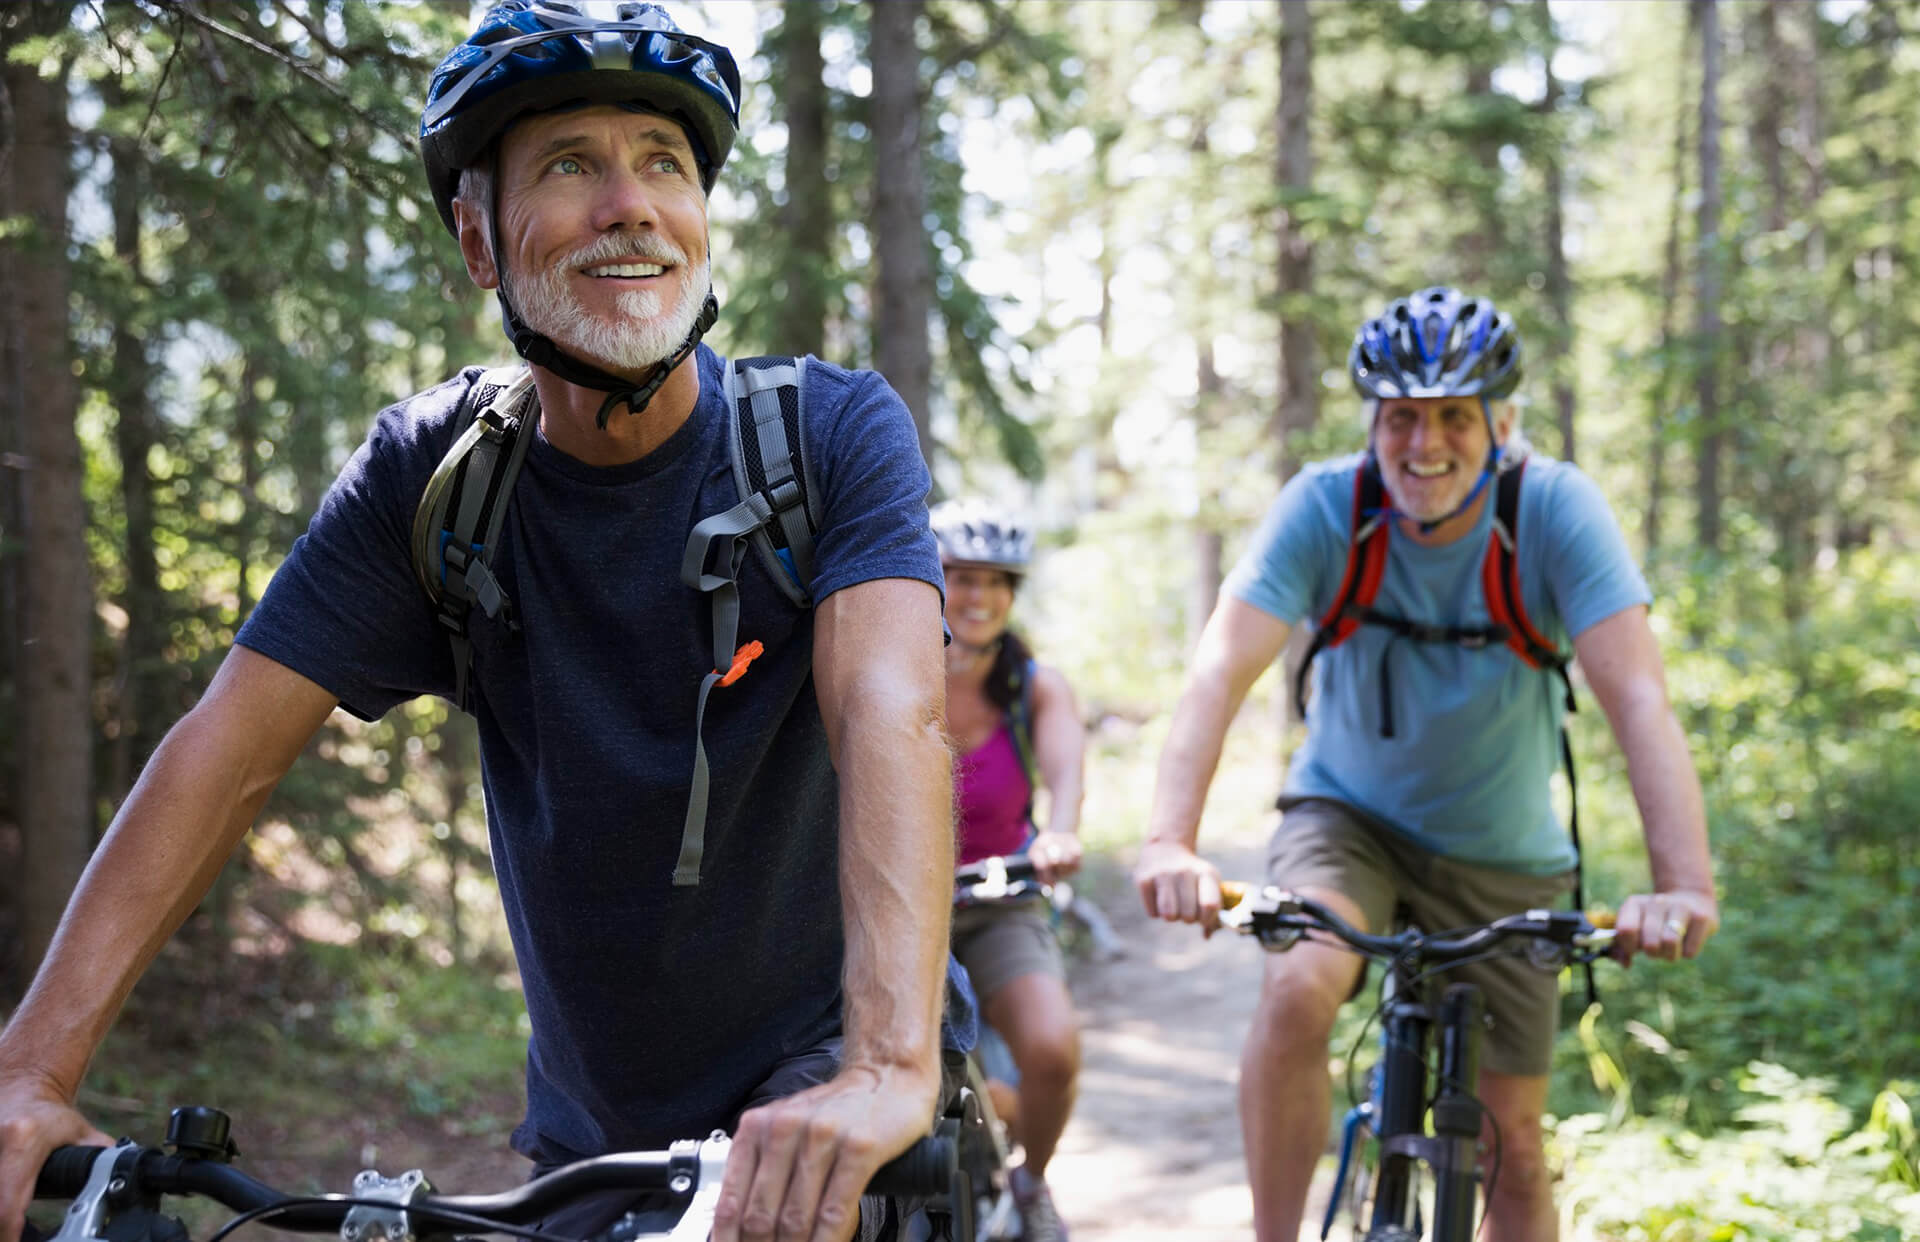 3 people in helmets riding their bikes through a forest trail 